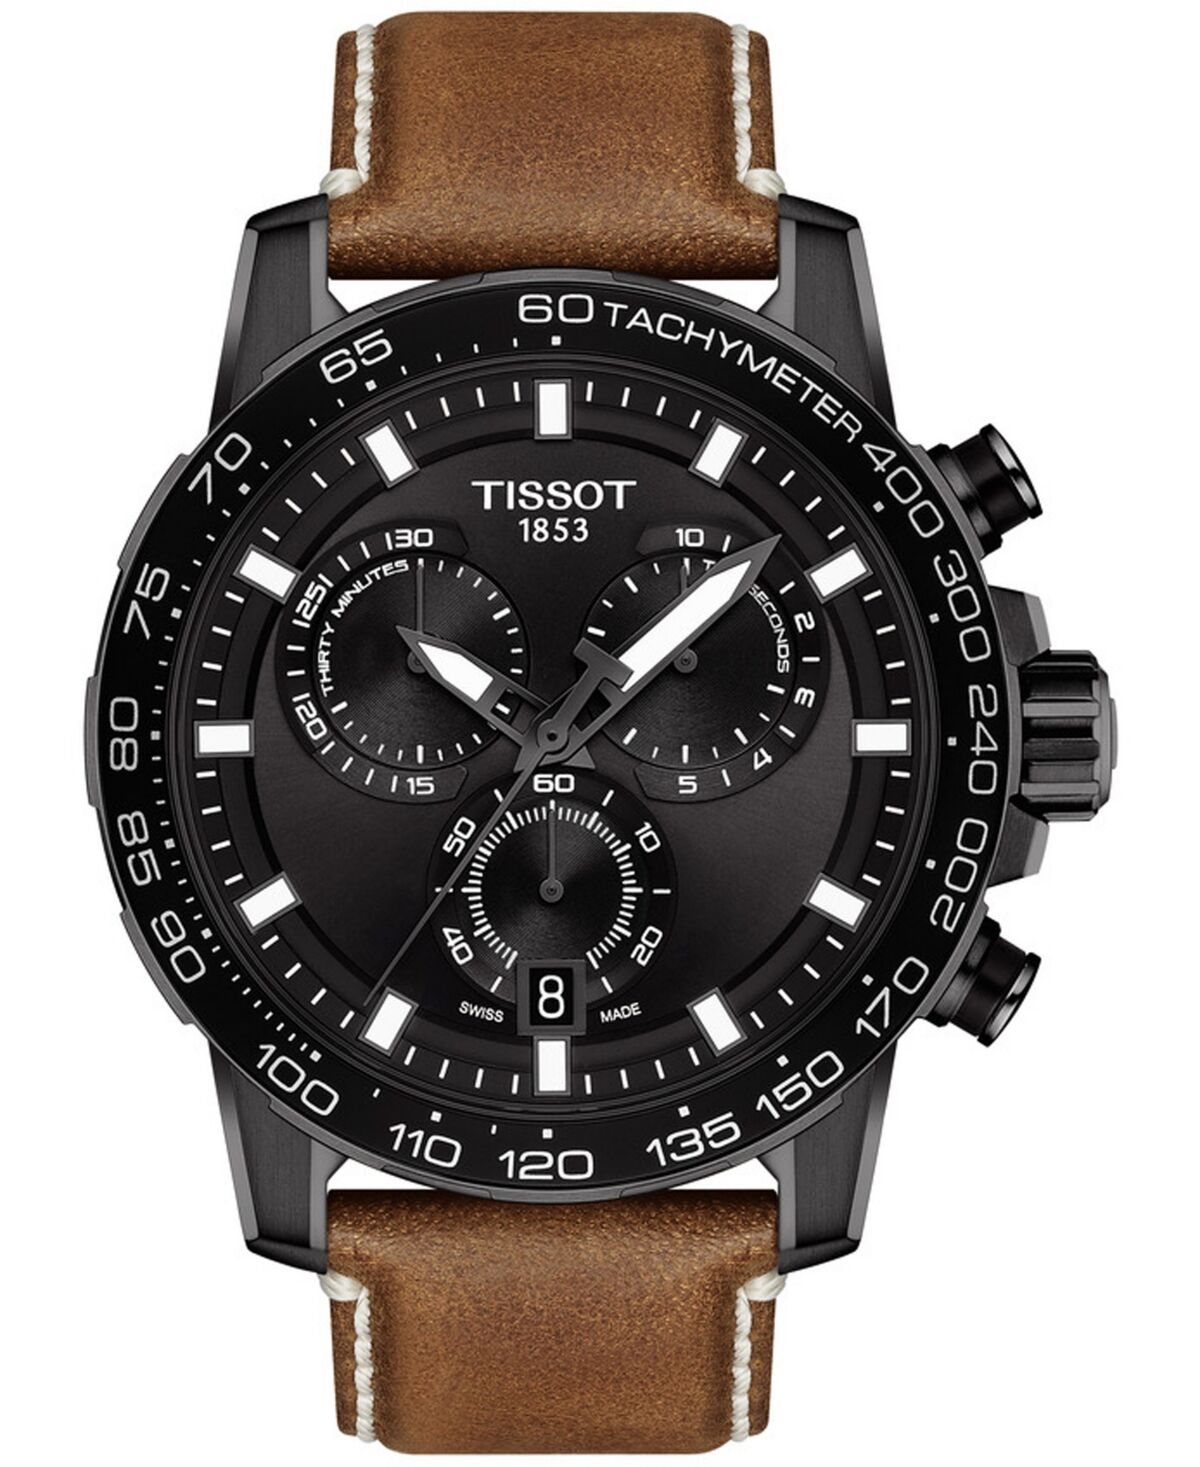 Tissot Men's Swiss Chronograph Supersport T-Sport Brown Leather Strap Watch 46mm - Brown